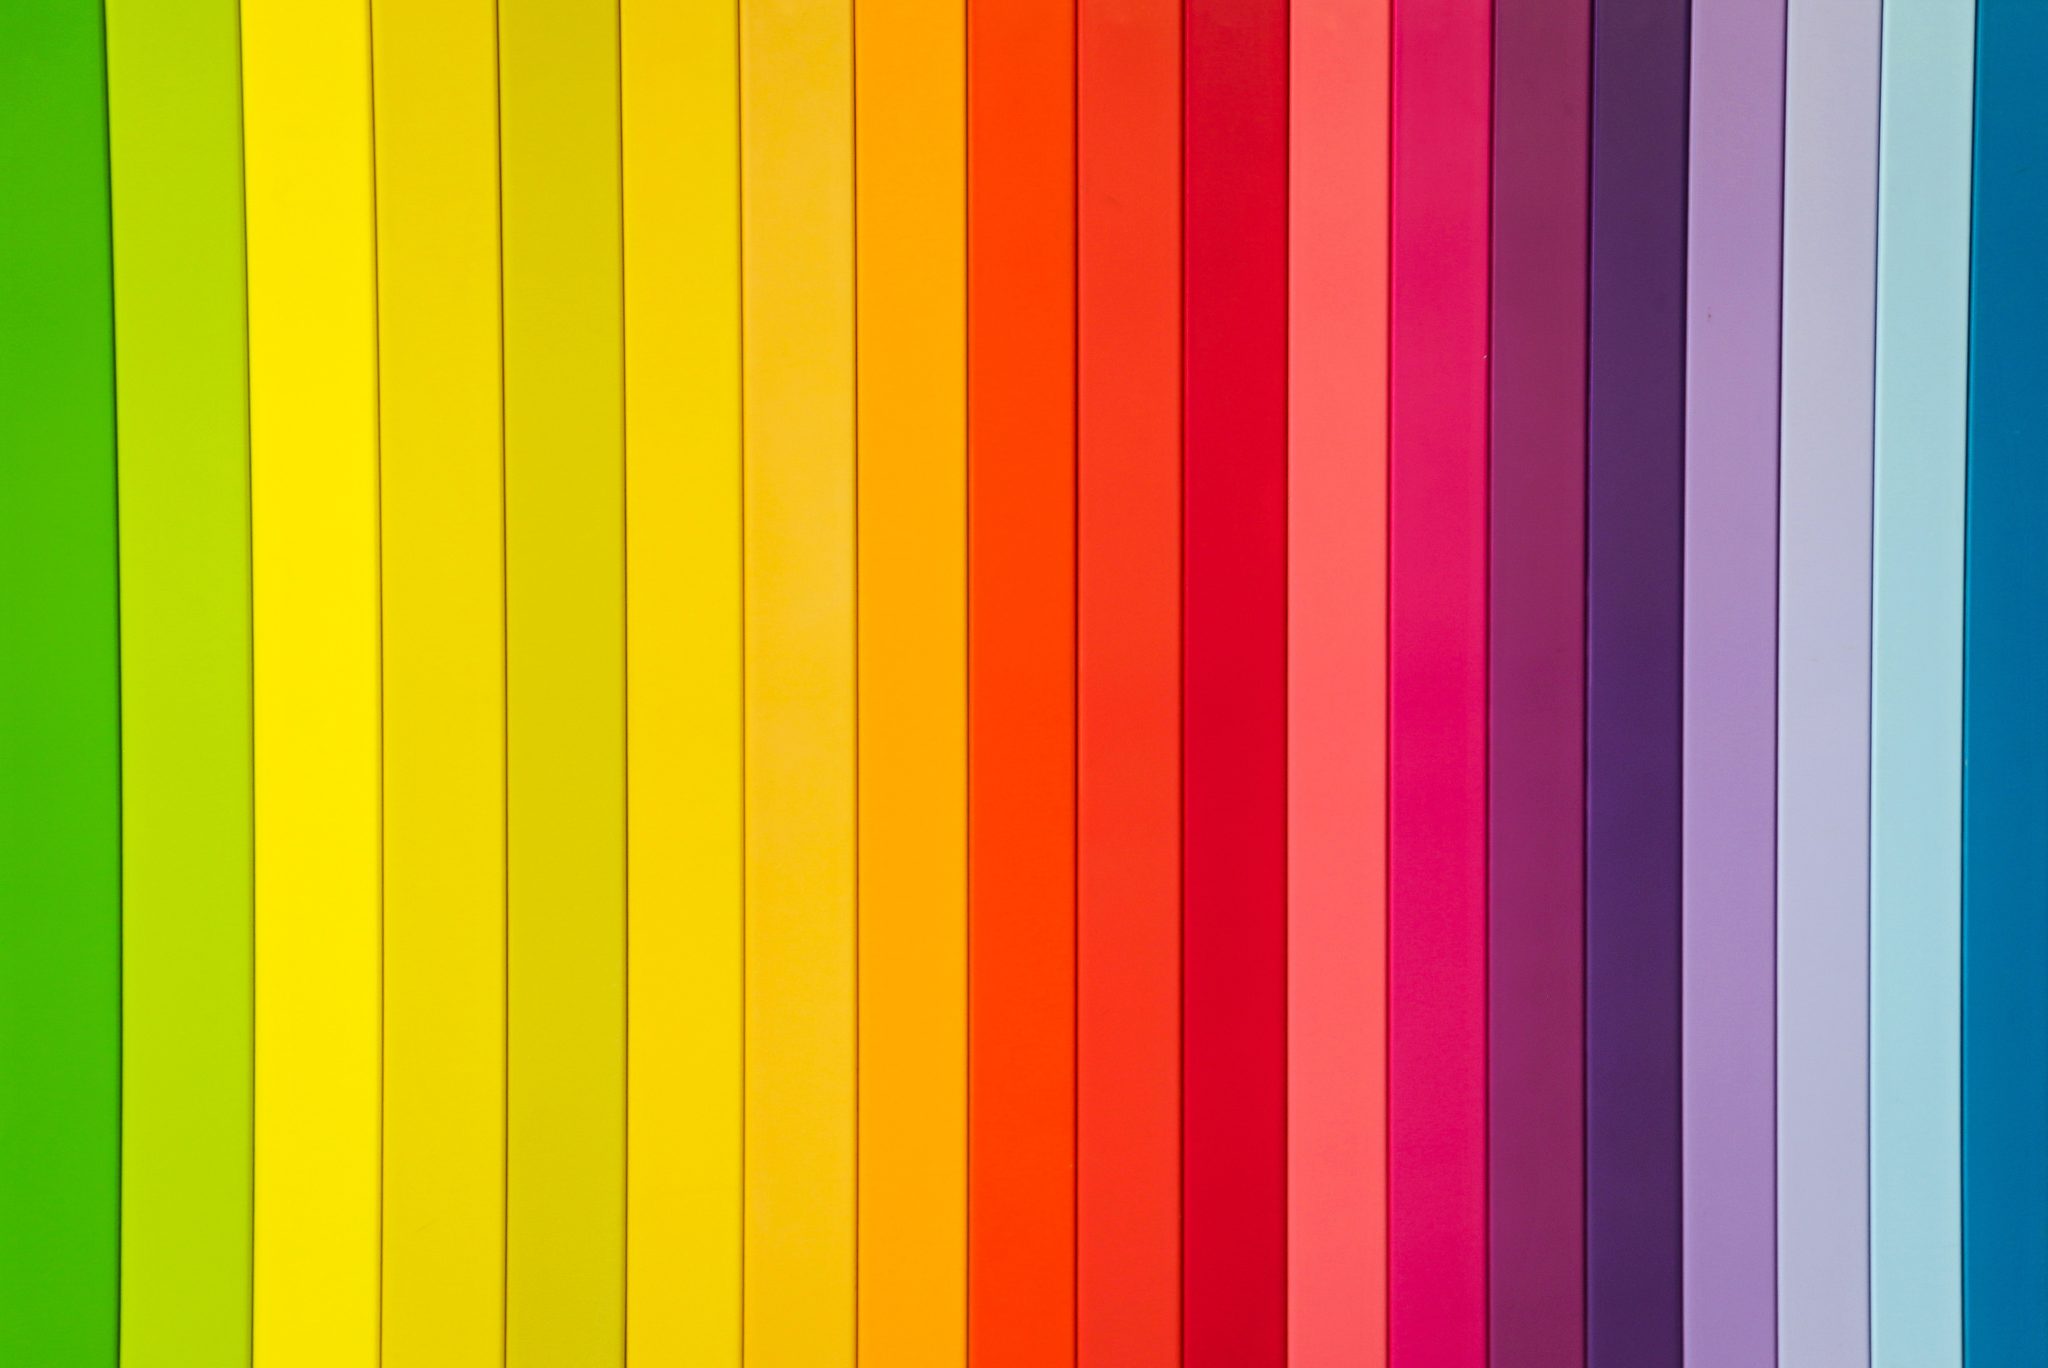 Designer Tips for Choosing the Right Color Palettes